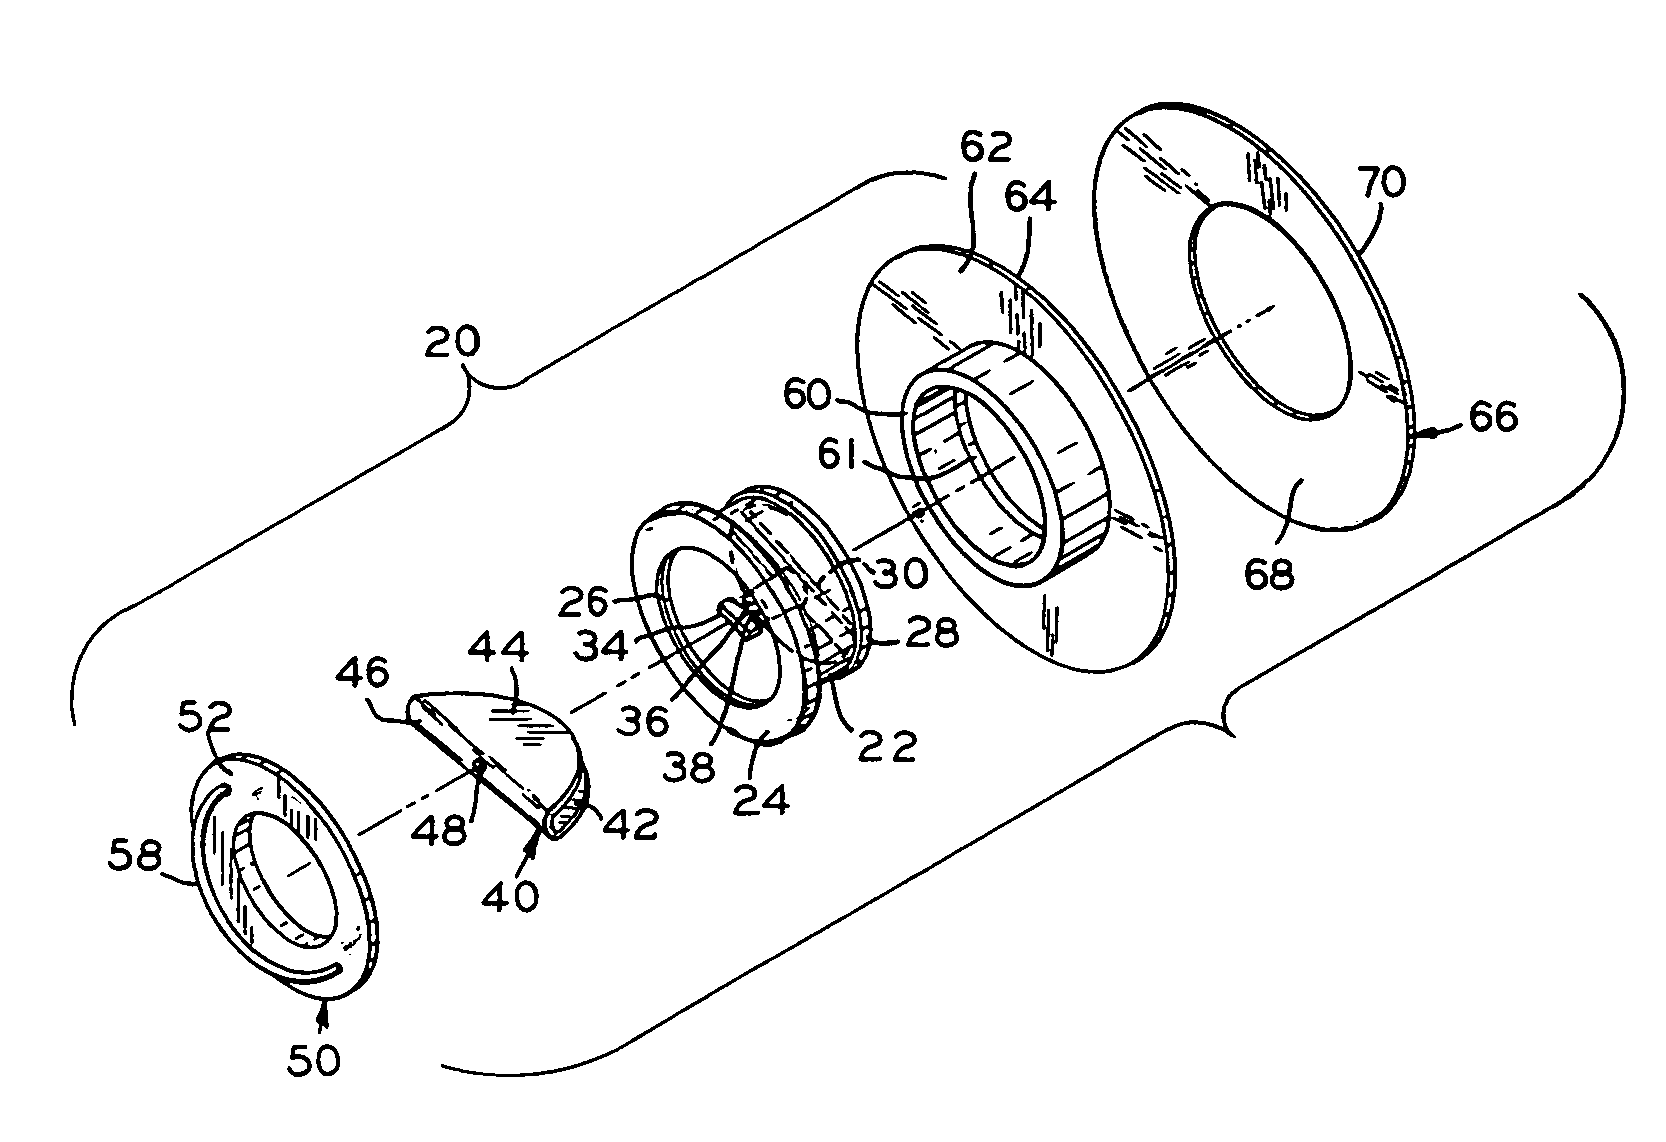 Method and apparatus for a tracheal valve